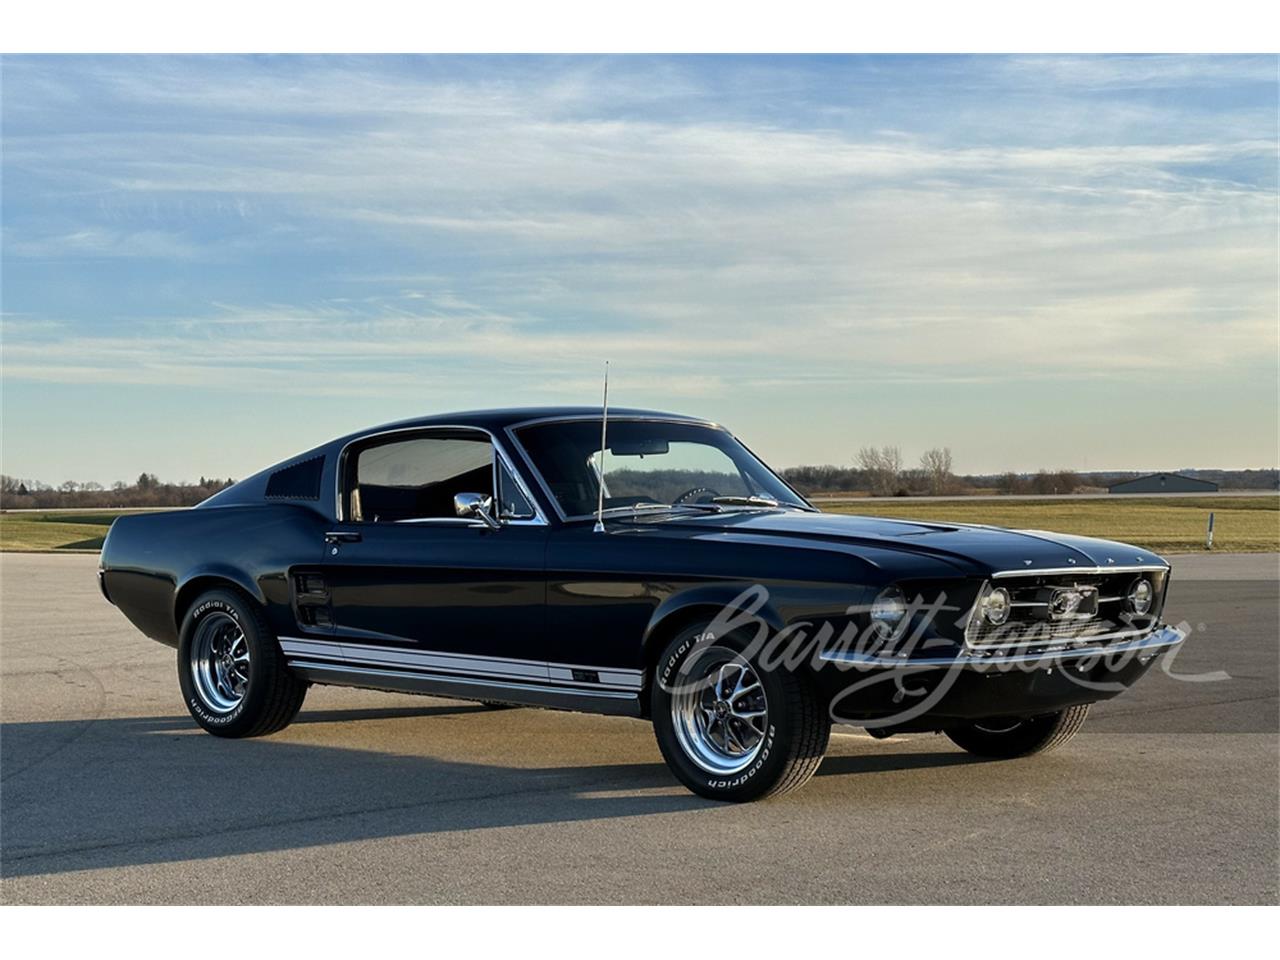 For Sale at Auction: 1967 Ford Mustang GT in Scottsdale, Arizona for sale in Scottsdale, AZ